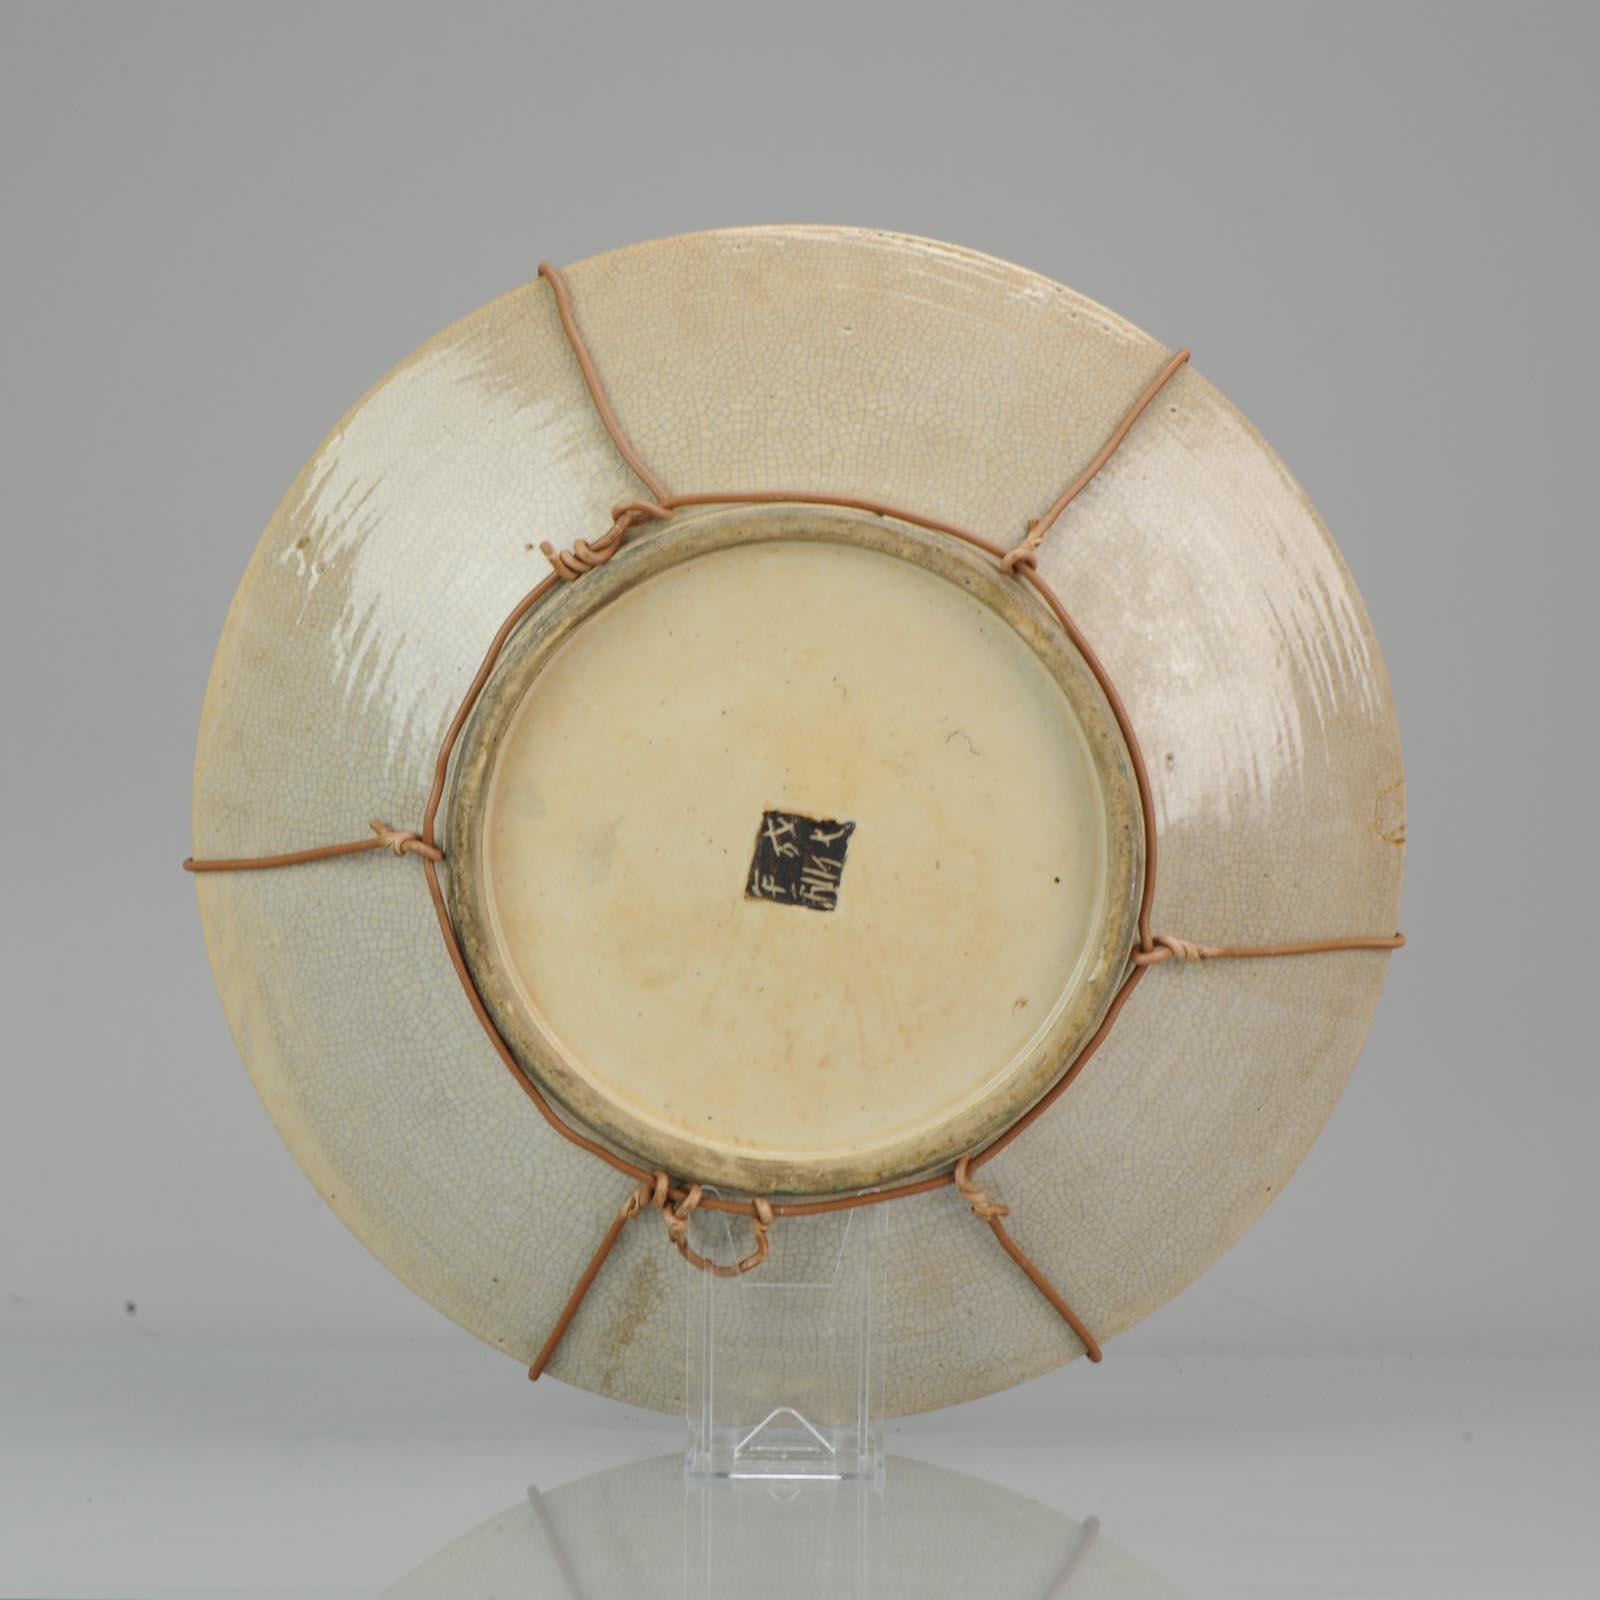 A very nicely made charger. Rare design. SE Asian market, circa 1900. Marked at base.

 
Condition
Overall condition D, small restored chip to rim. Size 370 x 55mm.